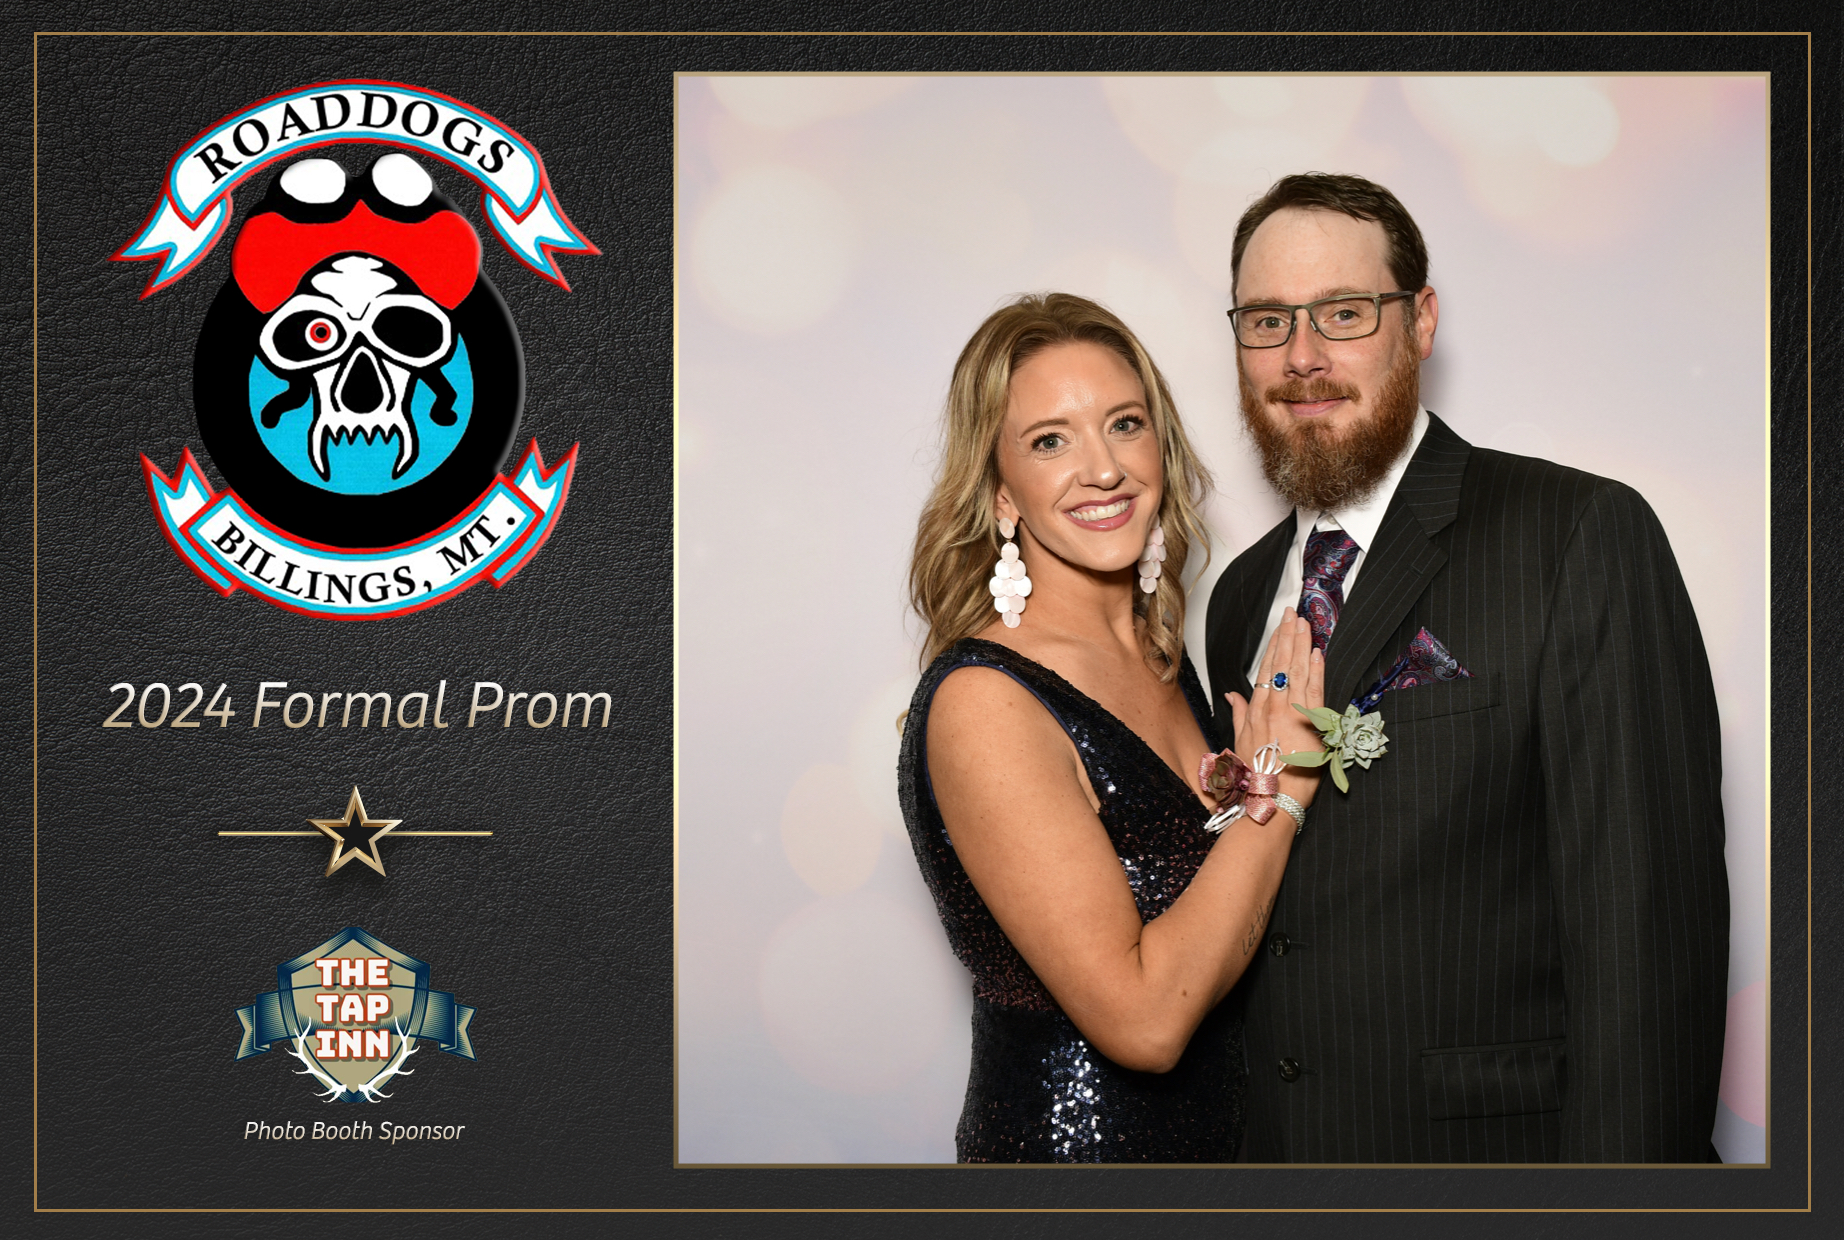 Sample photo from an adult prom event